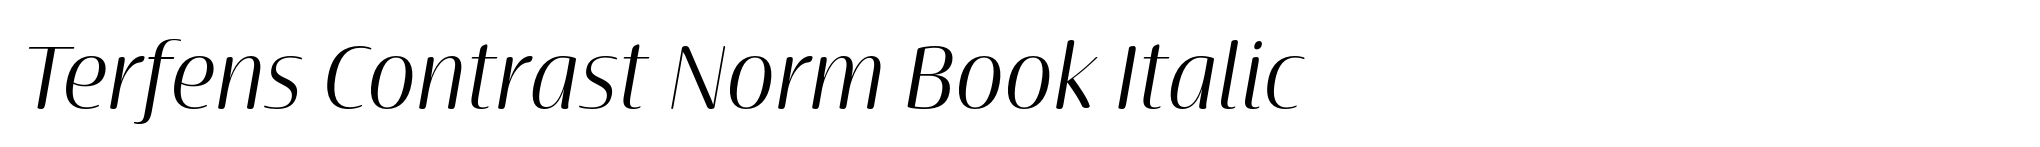 Terfens Contrast Norm Book Italic image